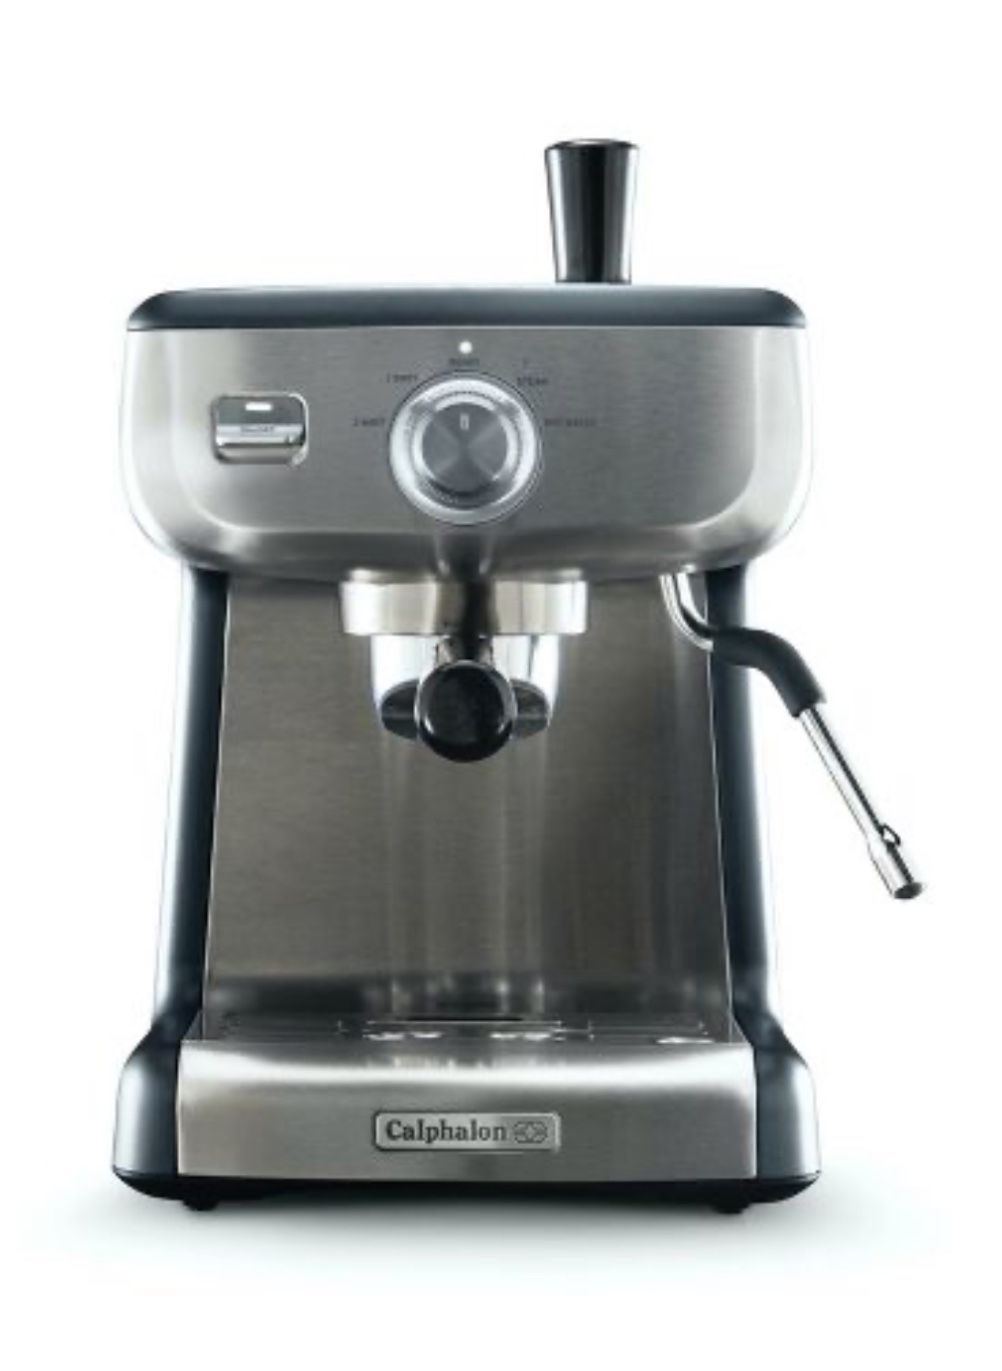 Calphalon Coffee Maker FOR SALE (PRICE VERY NEGOTIABLE)